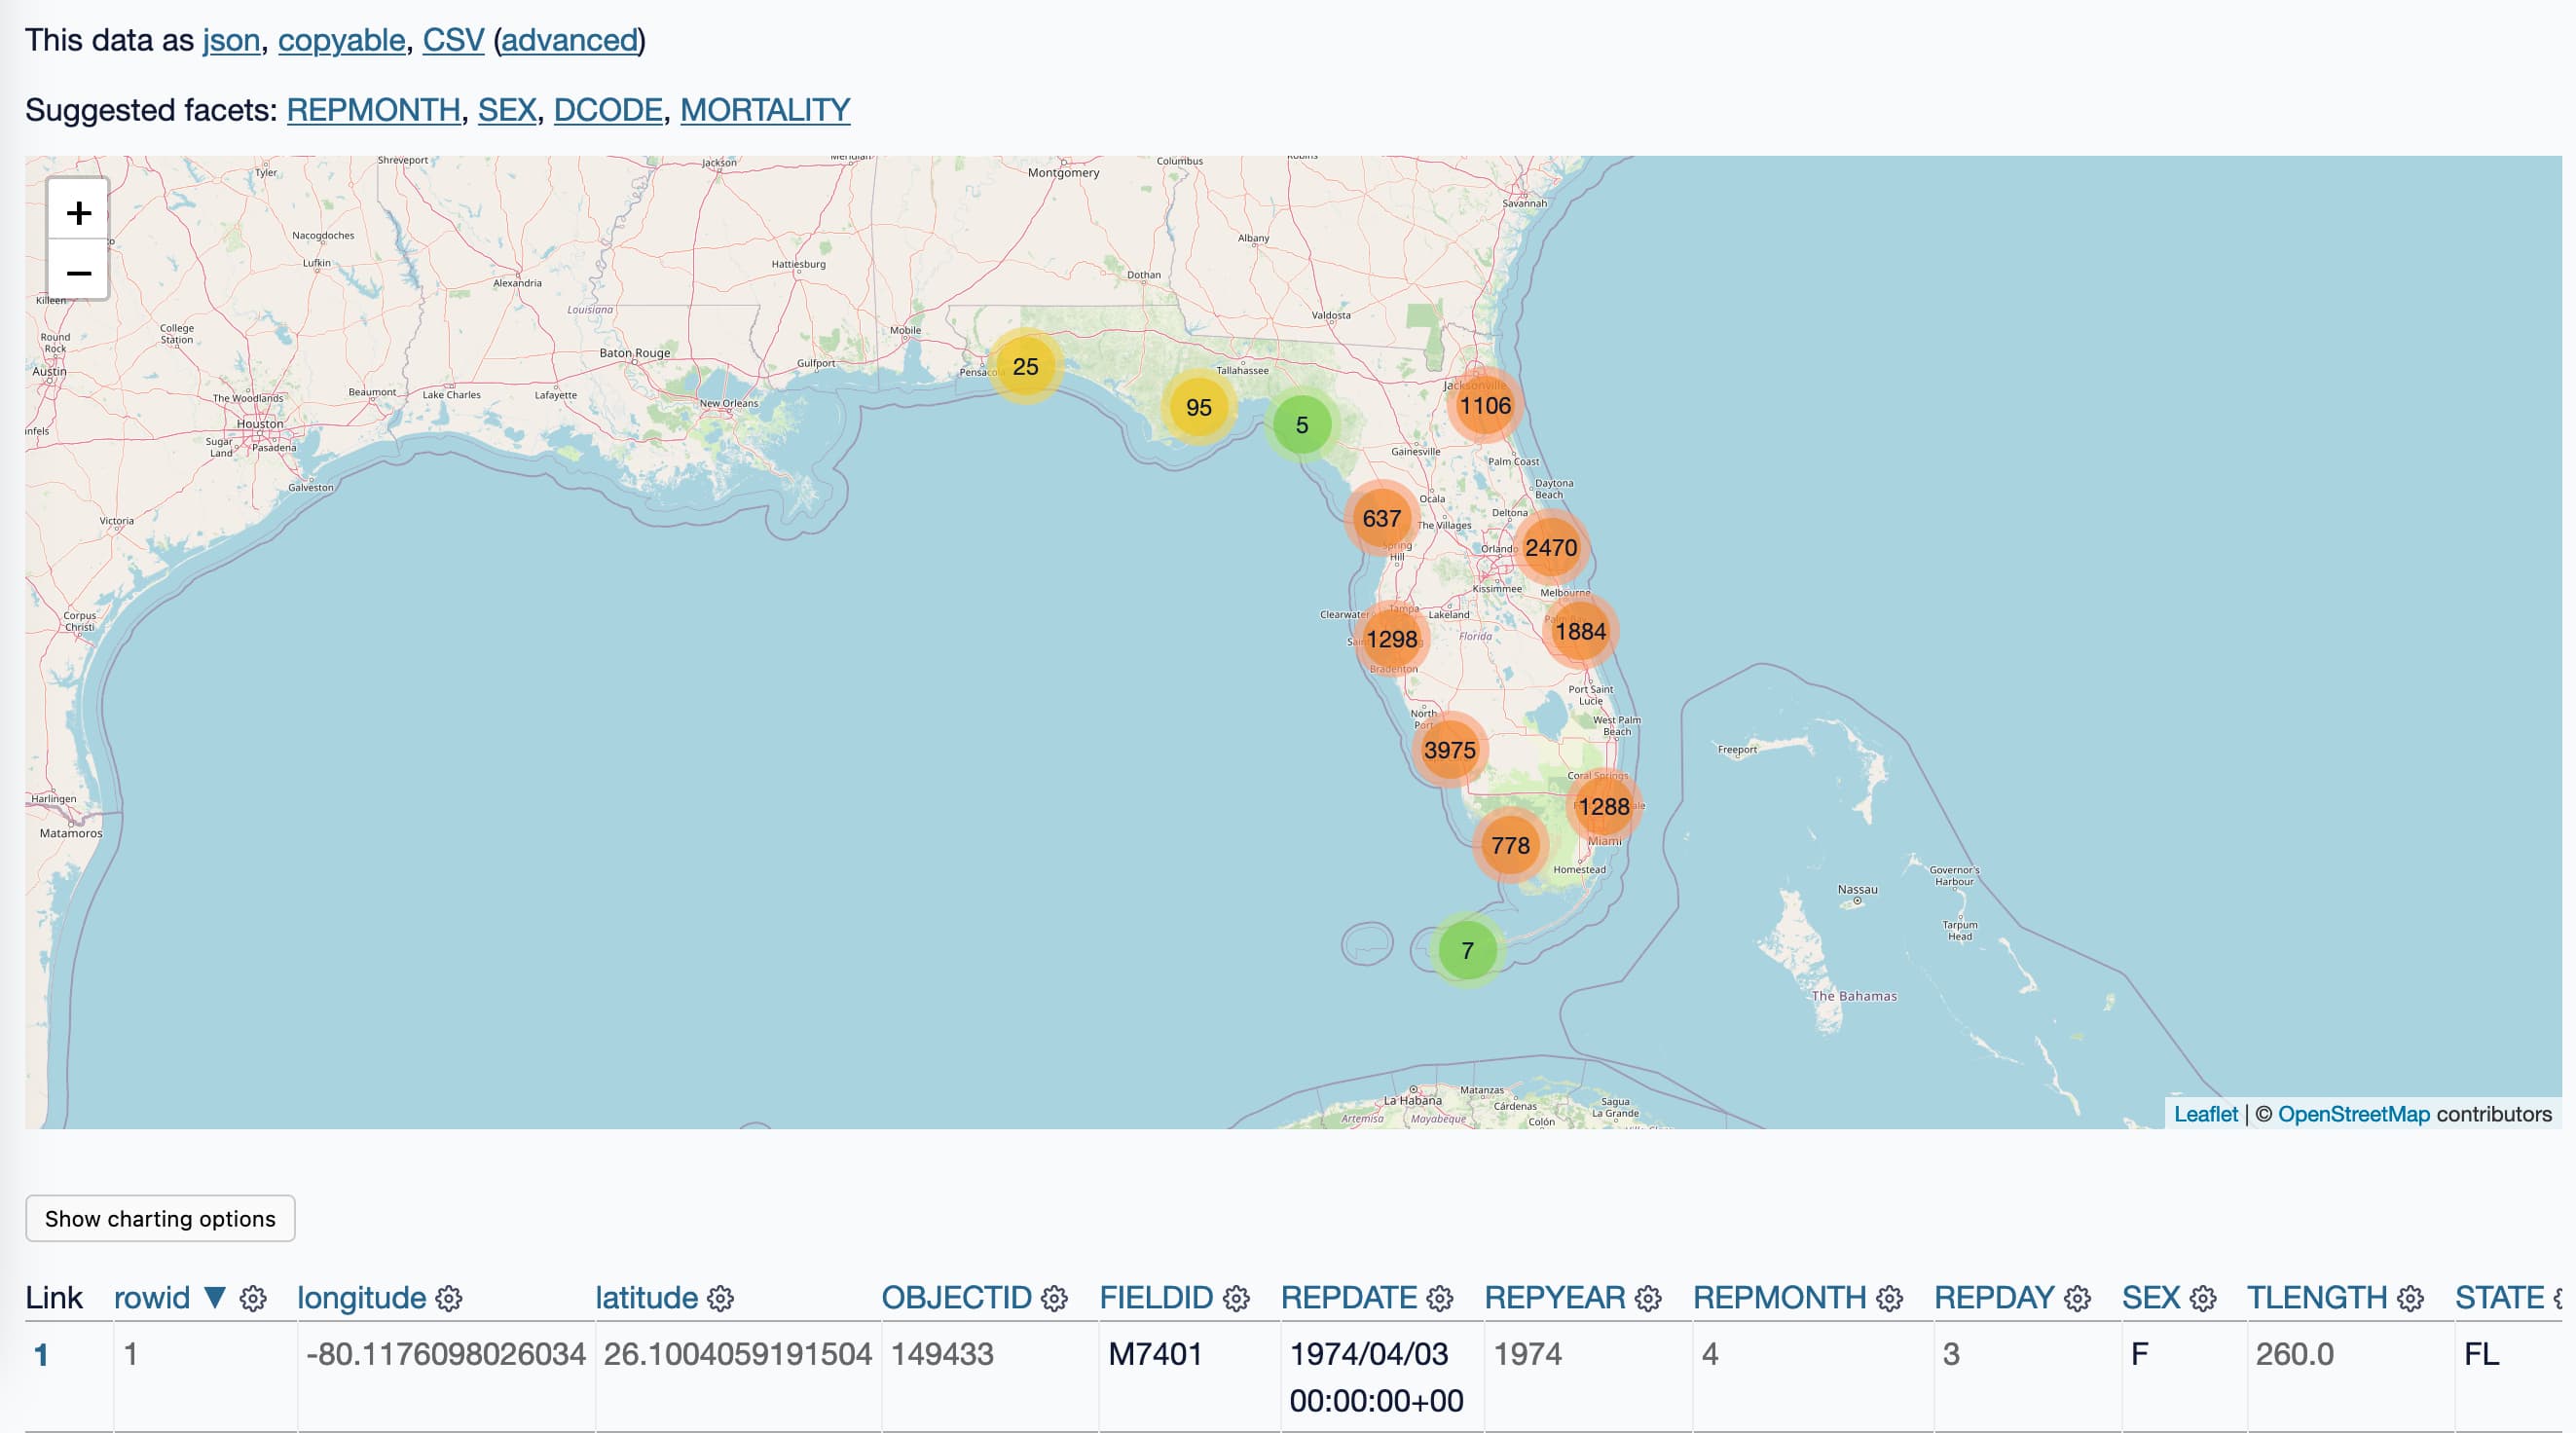 Screenshot of Datasette showing a map of manatee locations in Florida